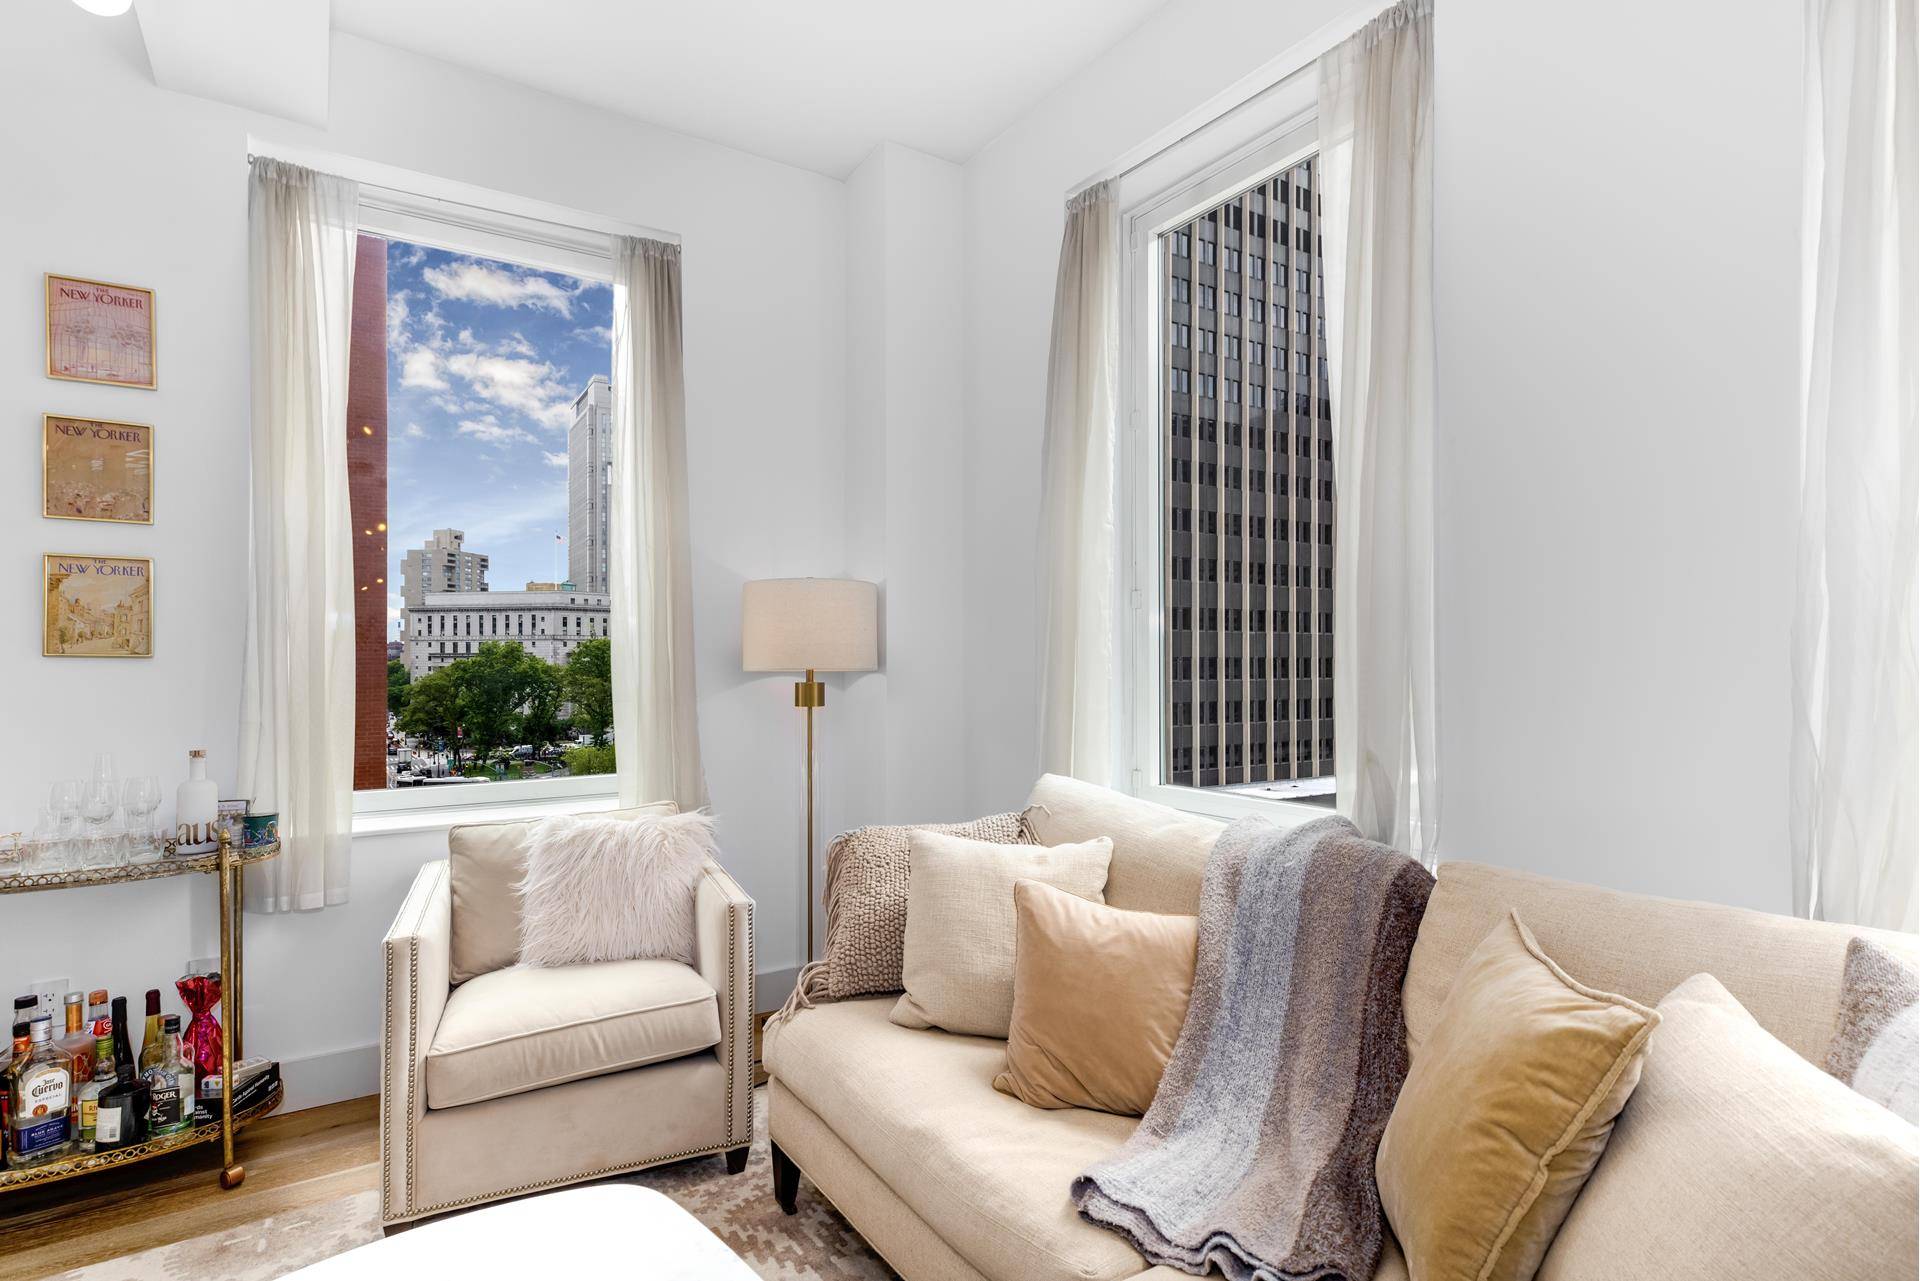 APARTMENT 502 IS A GORGEOUS SPRAWLING THREE BEDROOM CORNER HOME WITH OPEN VIEWS EAST AND SUN FLOODED EXPOSURE SOUTH AT 93 WORTH STREET A CONDO BUILDING LOCATED IN A PRIME ...